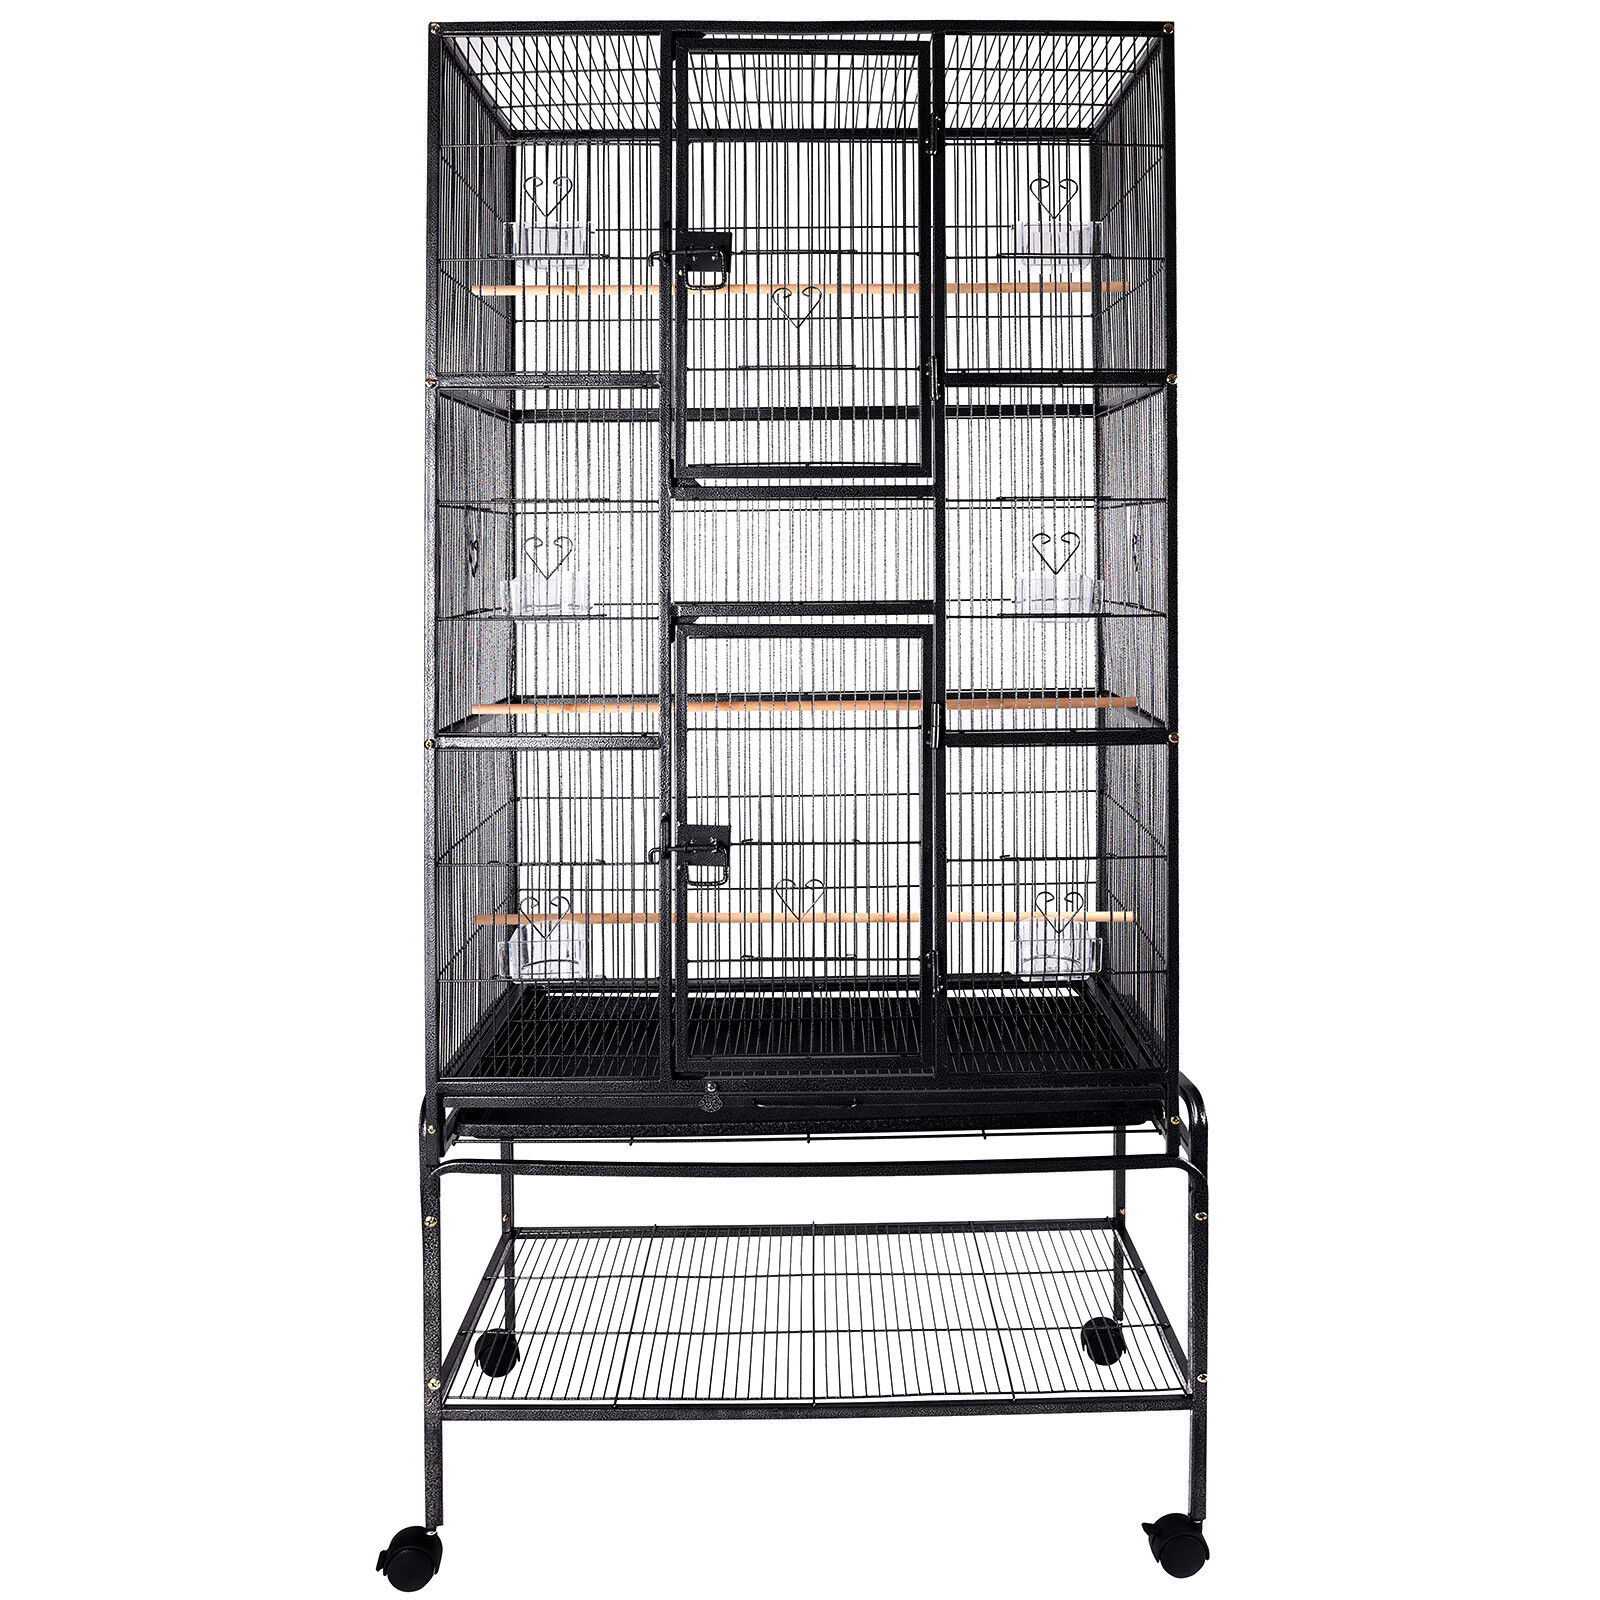 2In1 69'' Large Bird Cage Playtop Pet Supplies W/3 Perch Stands & 6 Cup Feeders